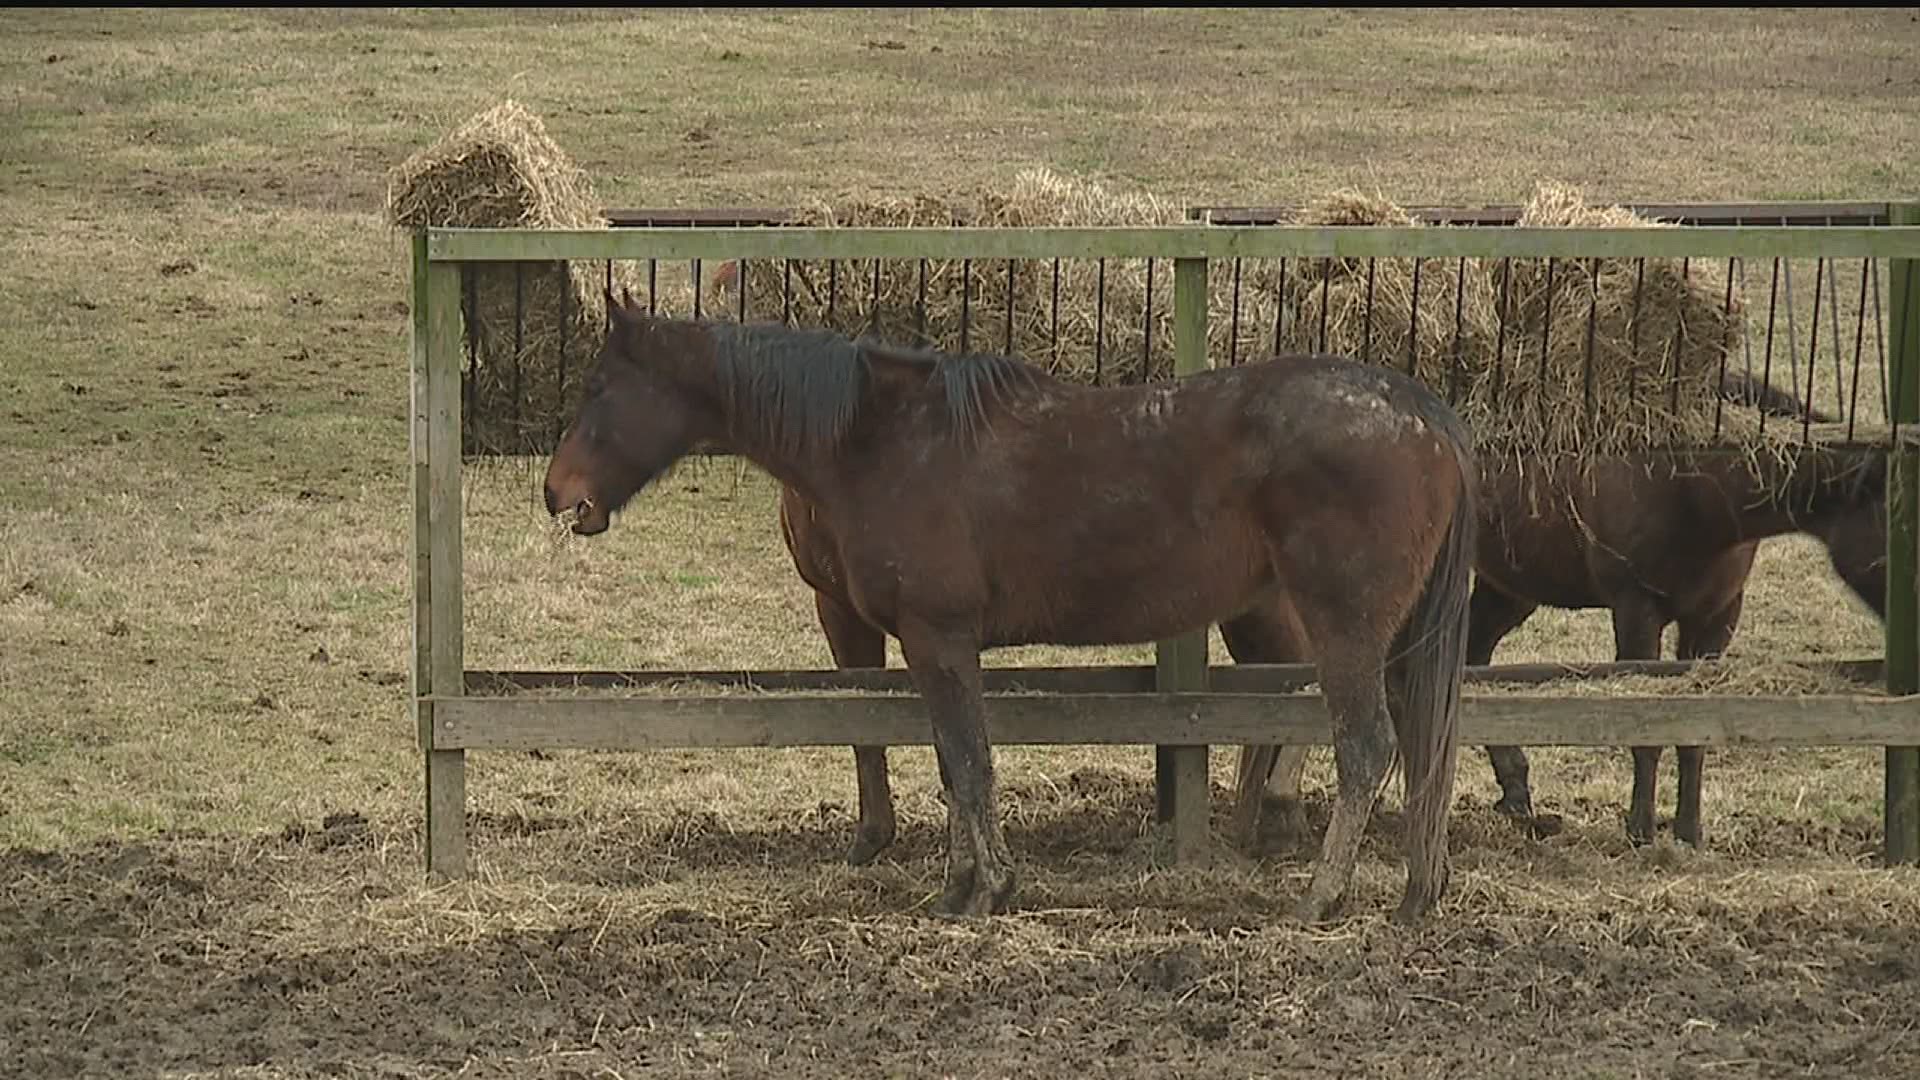 Horse racing supporters rally in Lebanon County against budget proposal that would cut funding